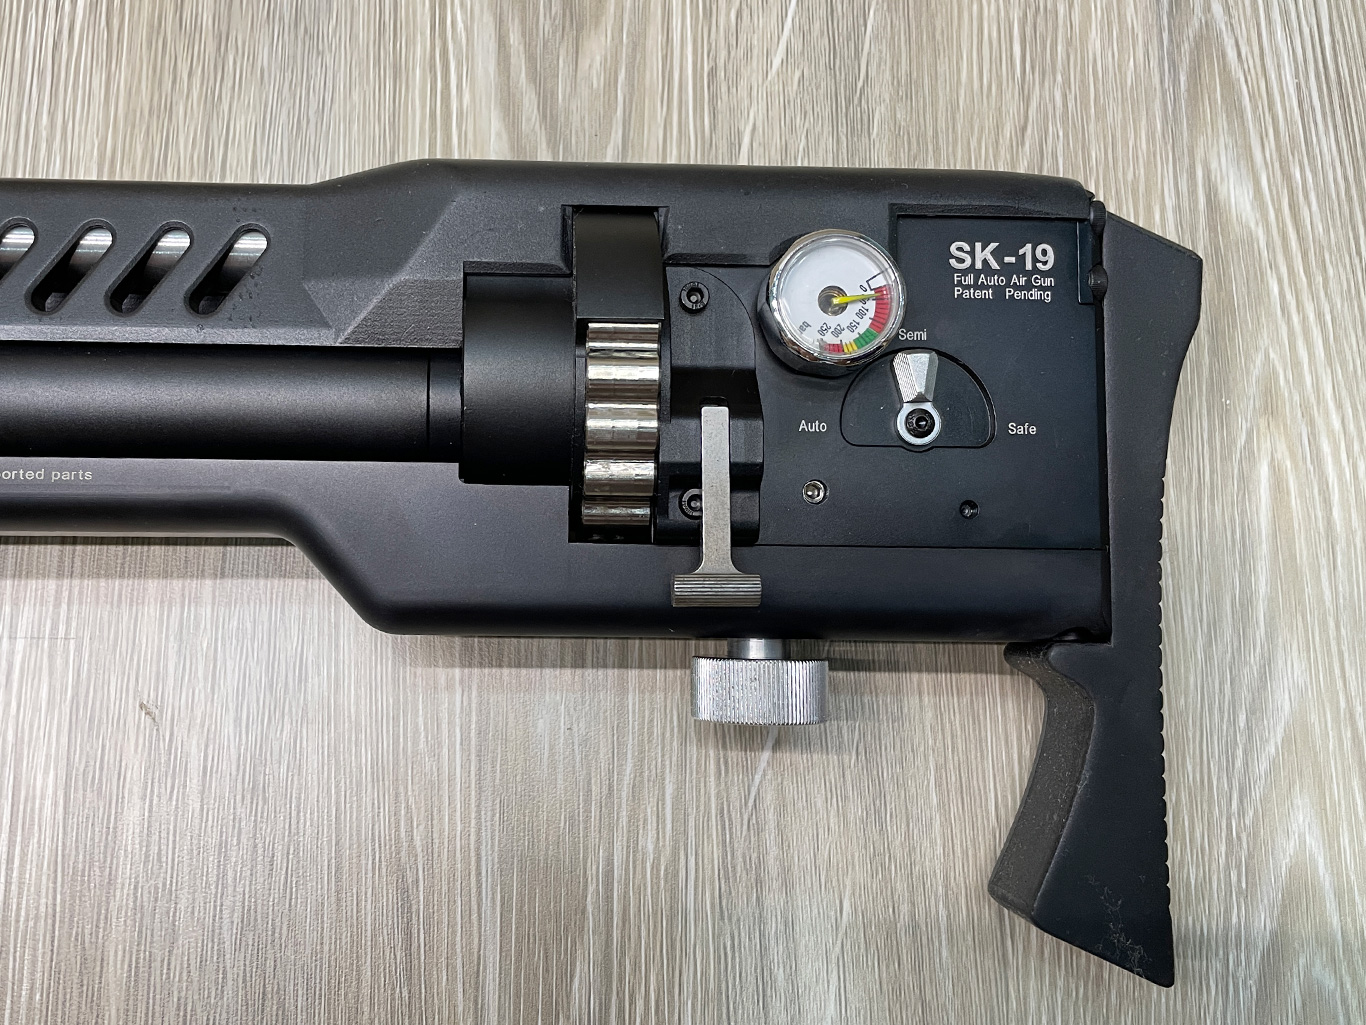 sung-LCS-SK-19-full-auto